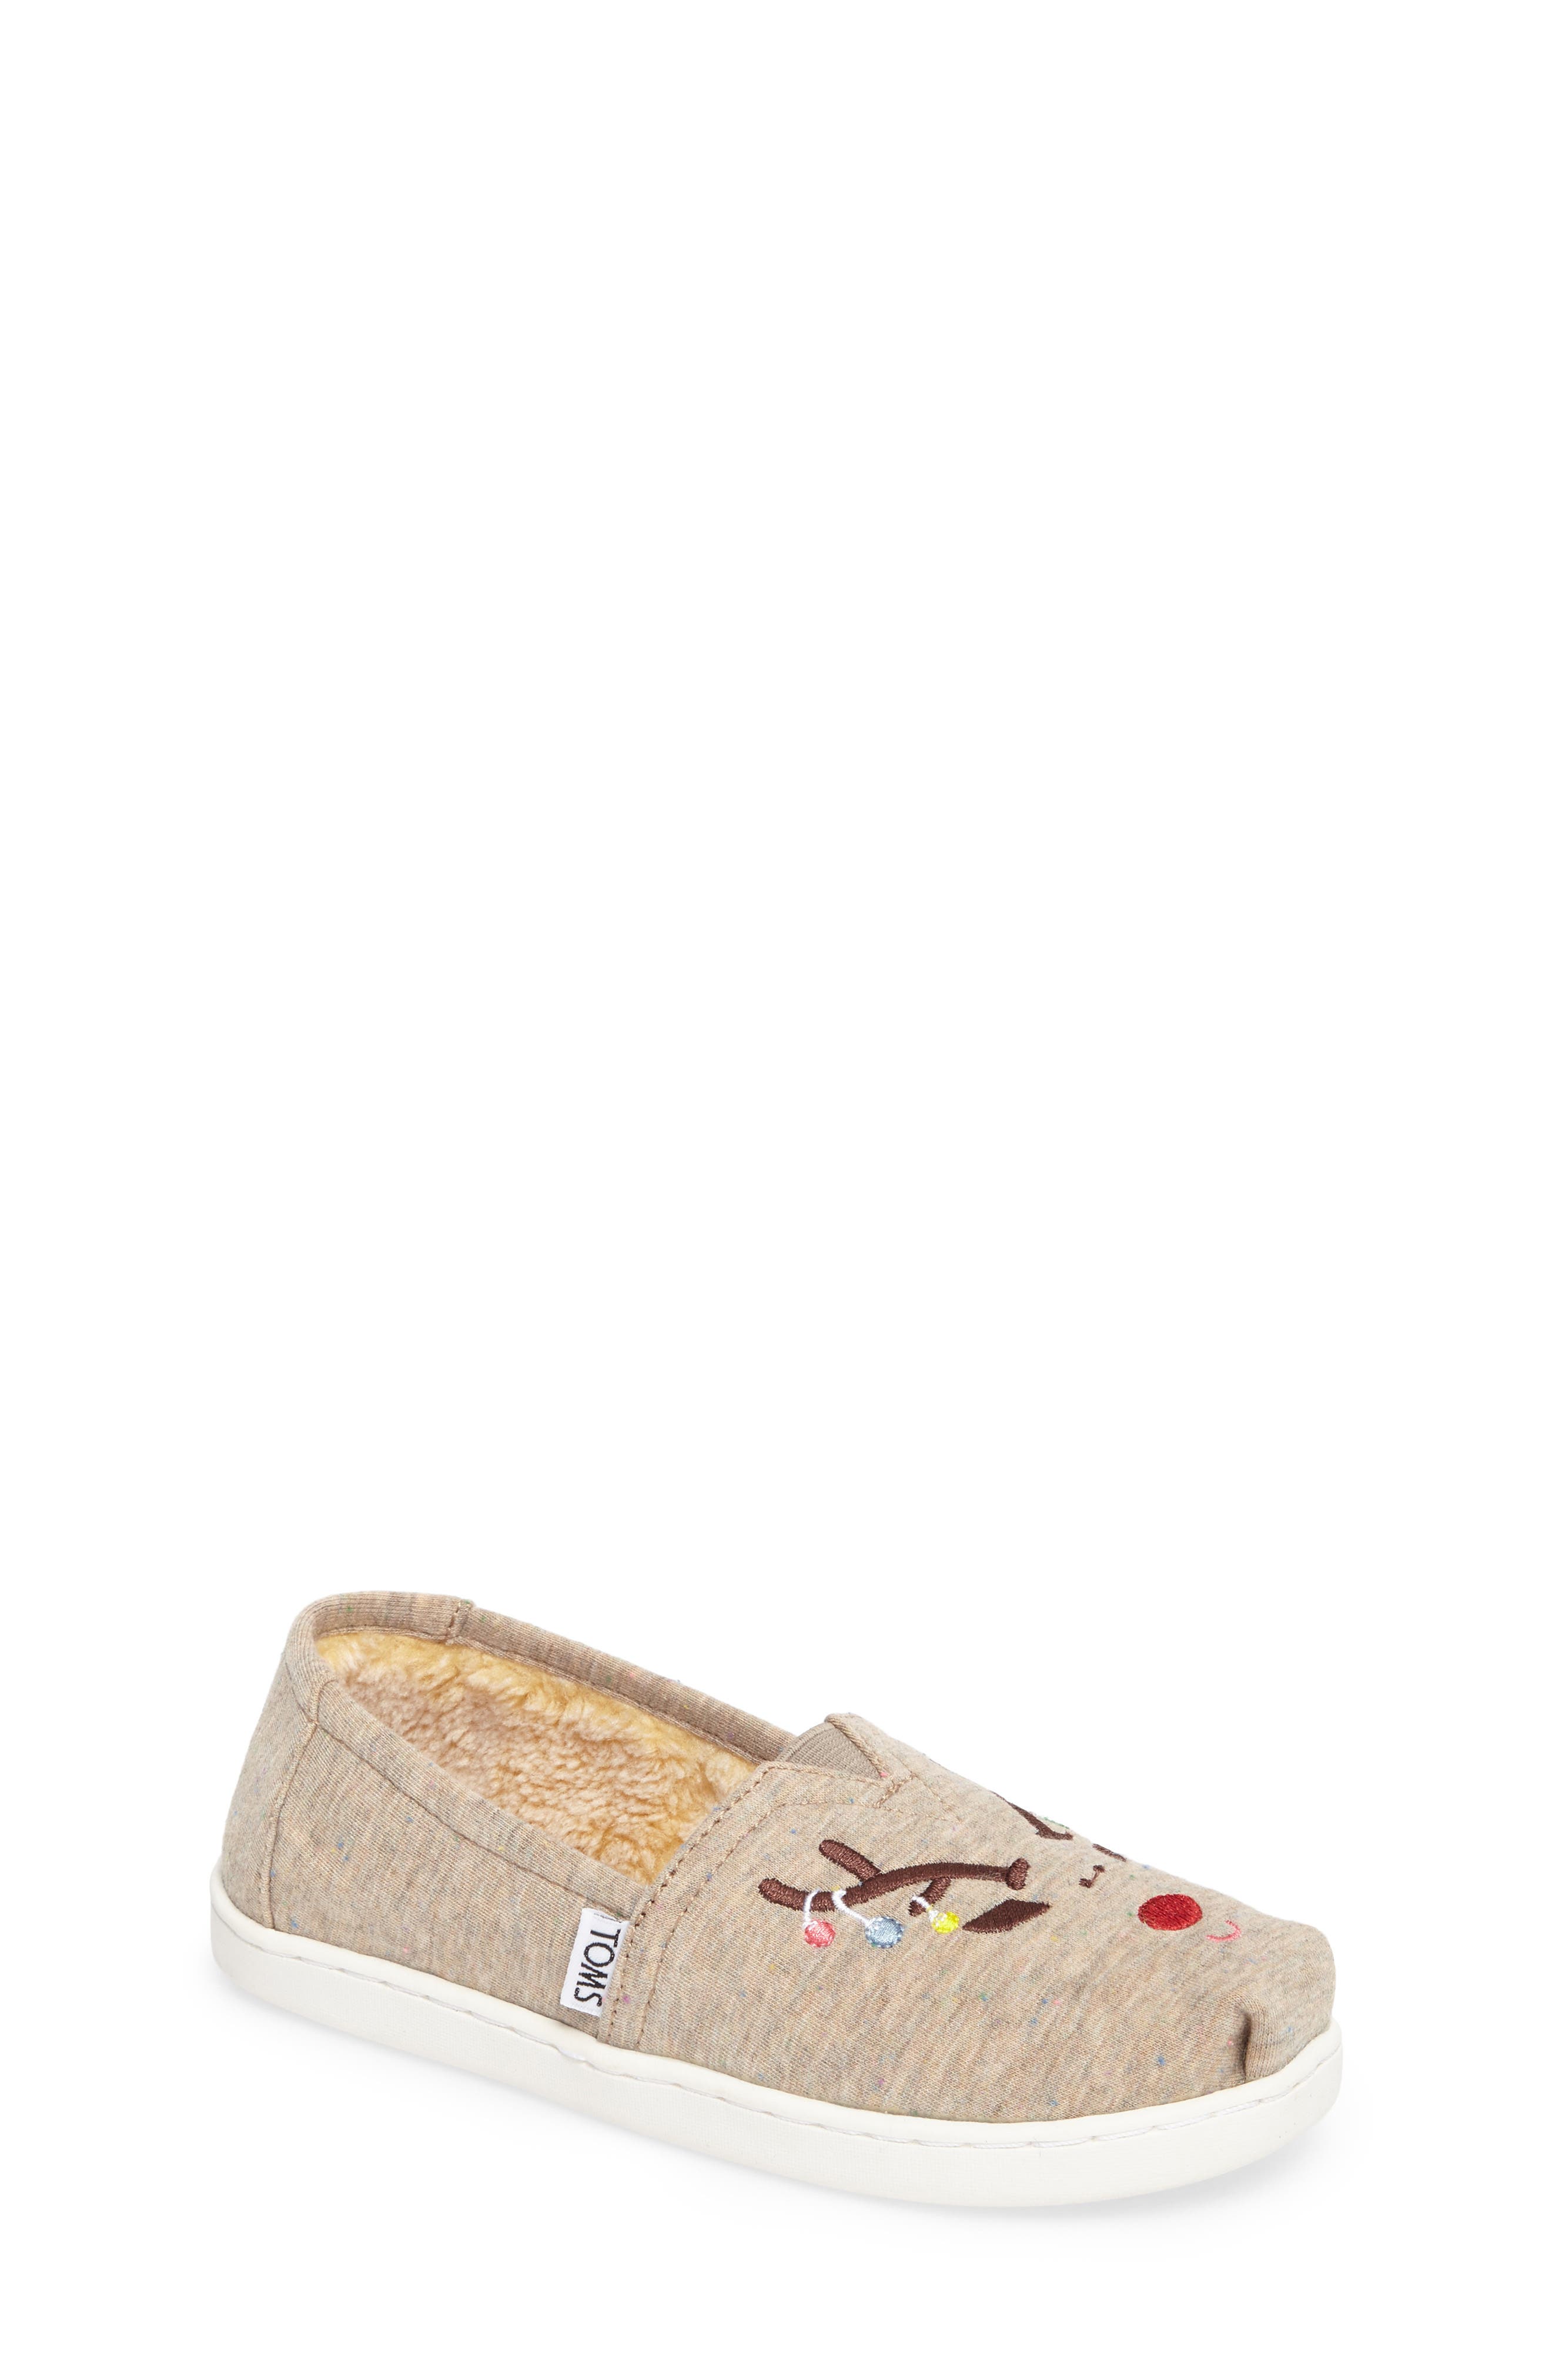 toms wide width womens shoes